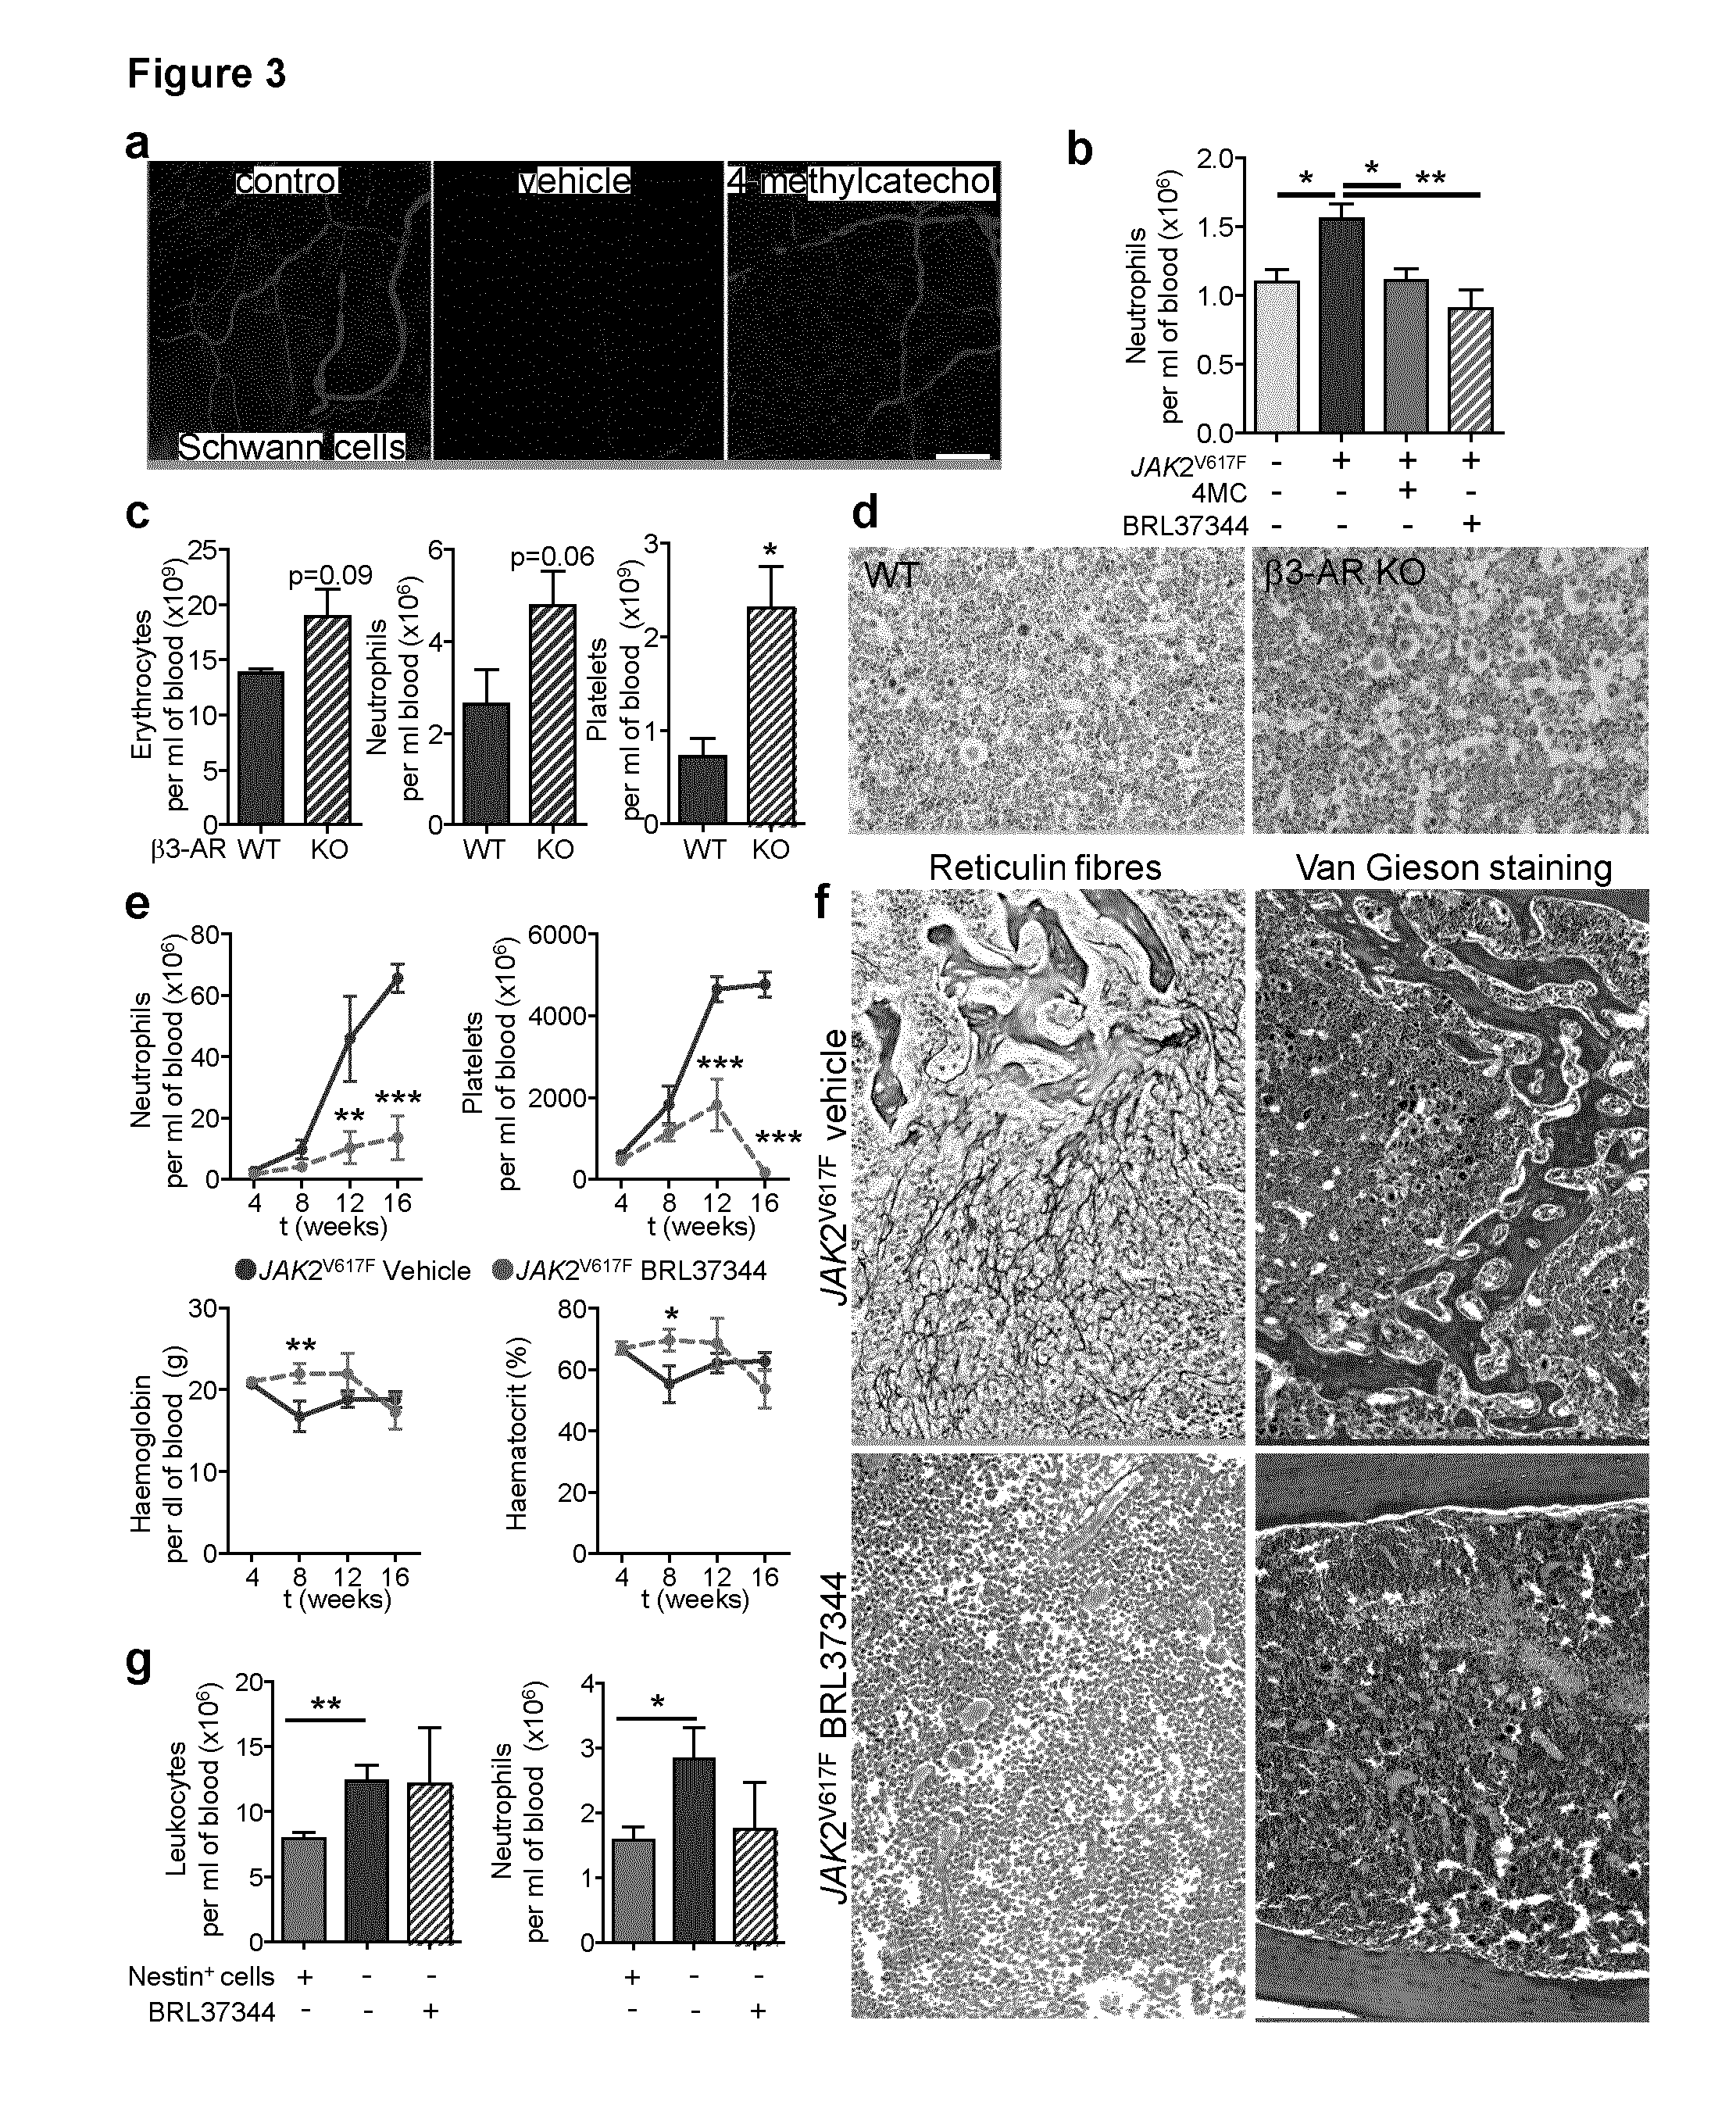 Compounds suitable for the treatment of myeloproliferative neoplasms as well as methods for the diagnosis/prognosis of myeloproliferative neoplasms